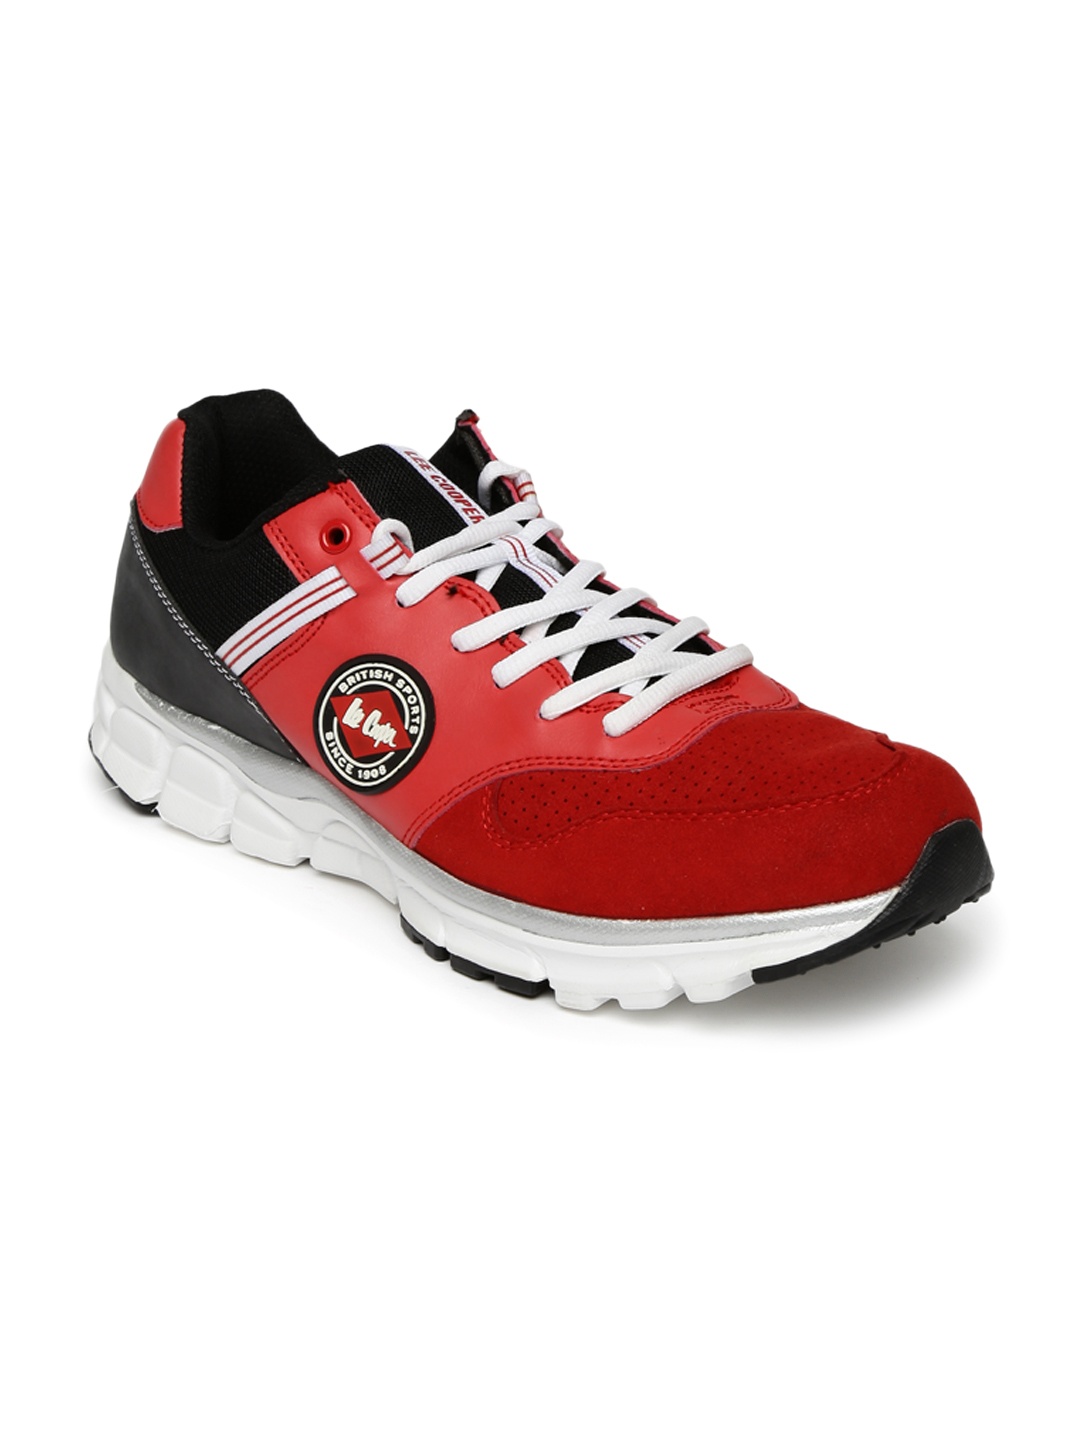 Lee Cooper Men Red & Black Running Shoes price Myntra. Sports Shoes ...